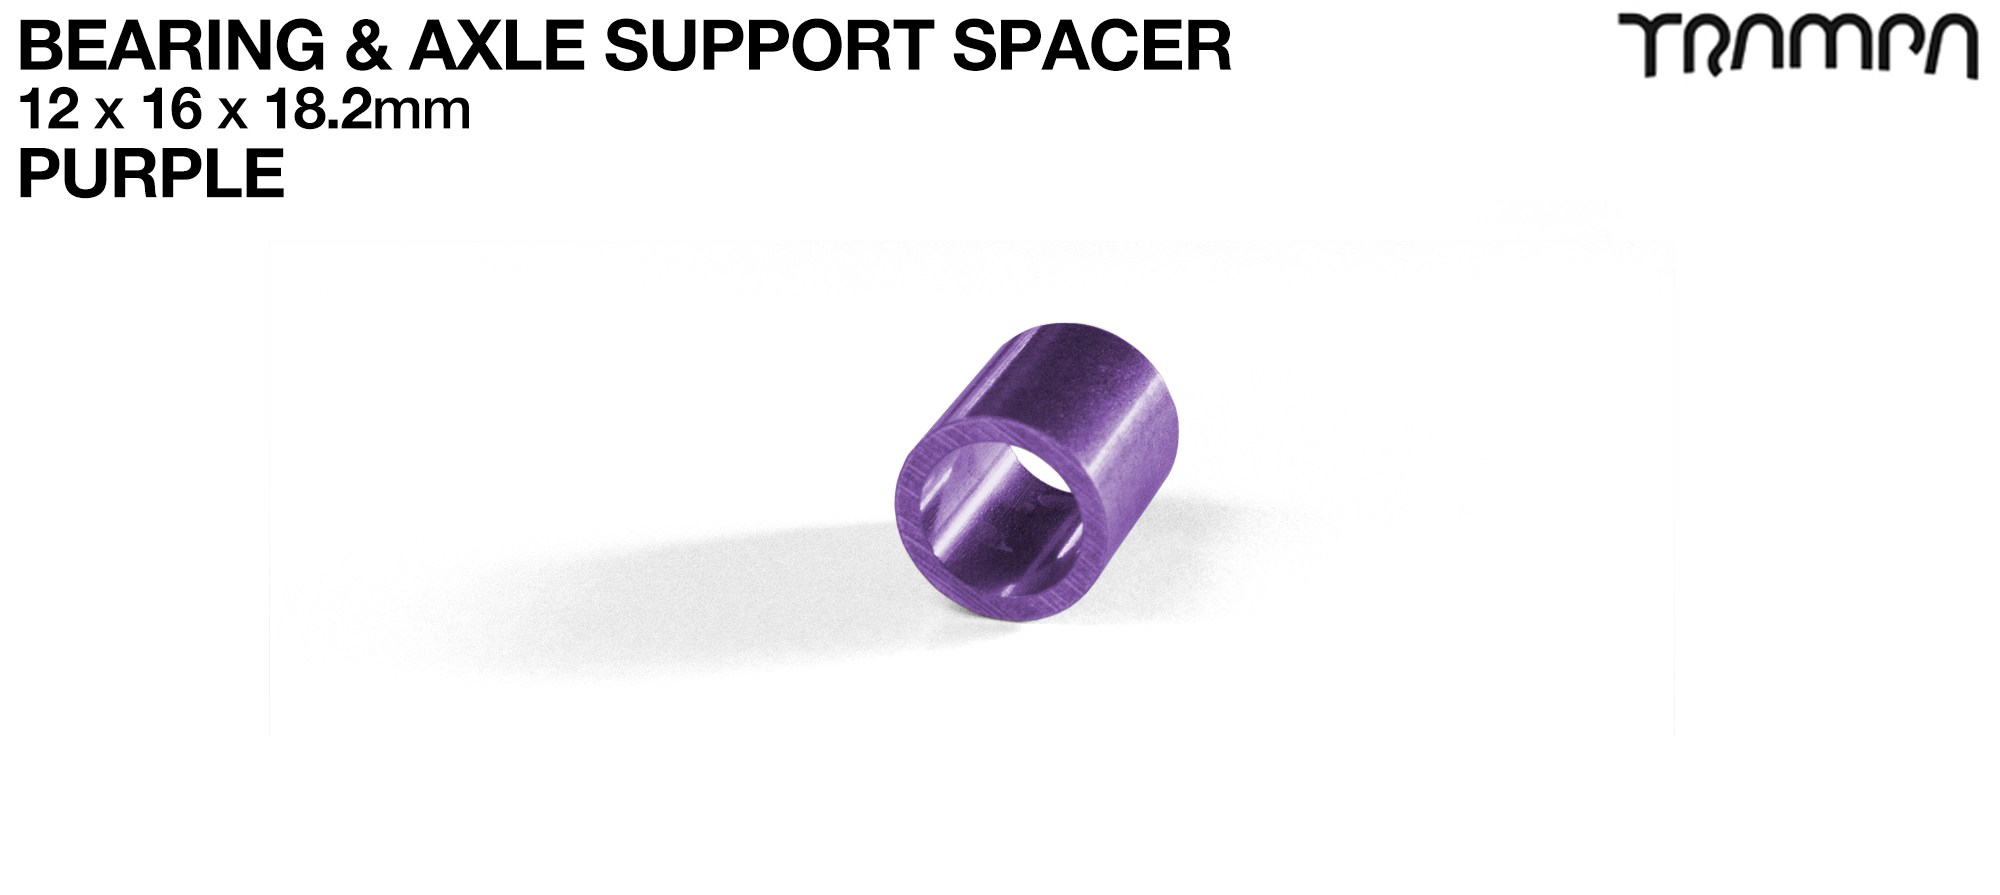 Wheel Support Axle Spacers - PURPLE 